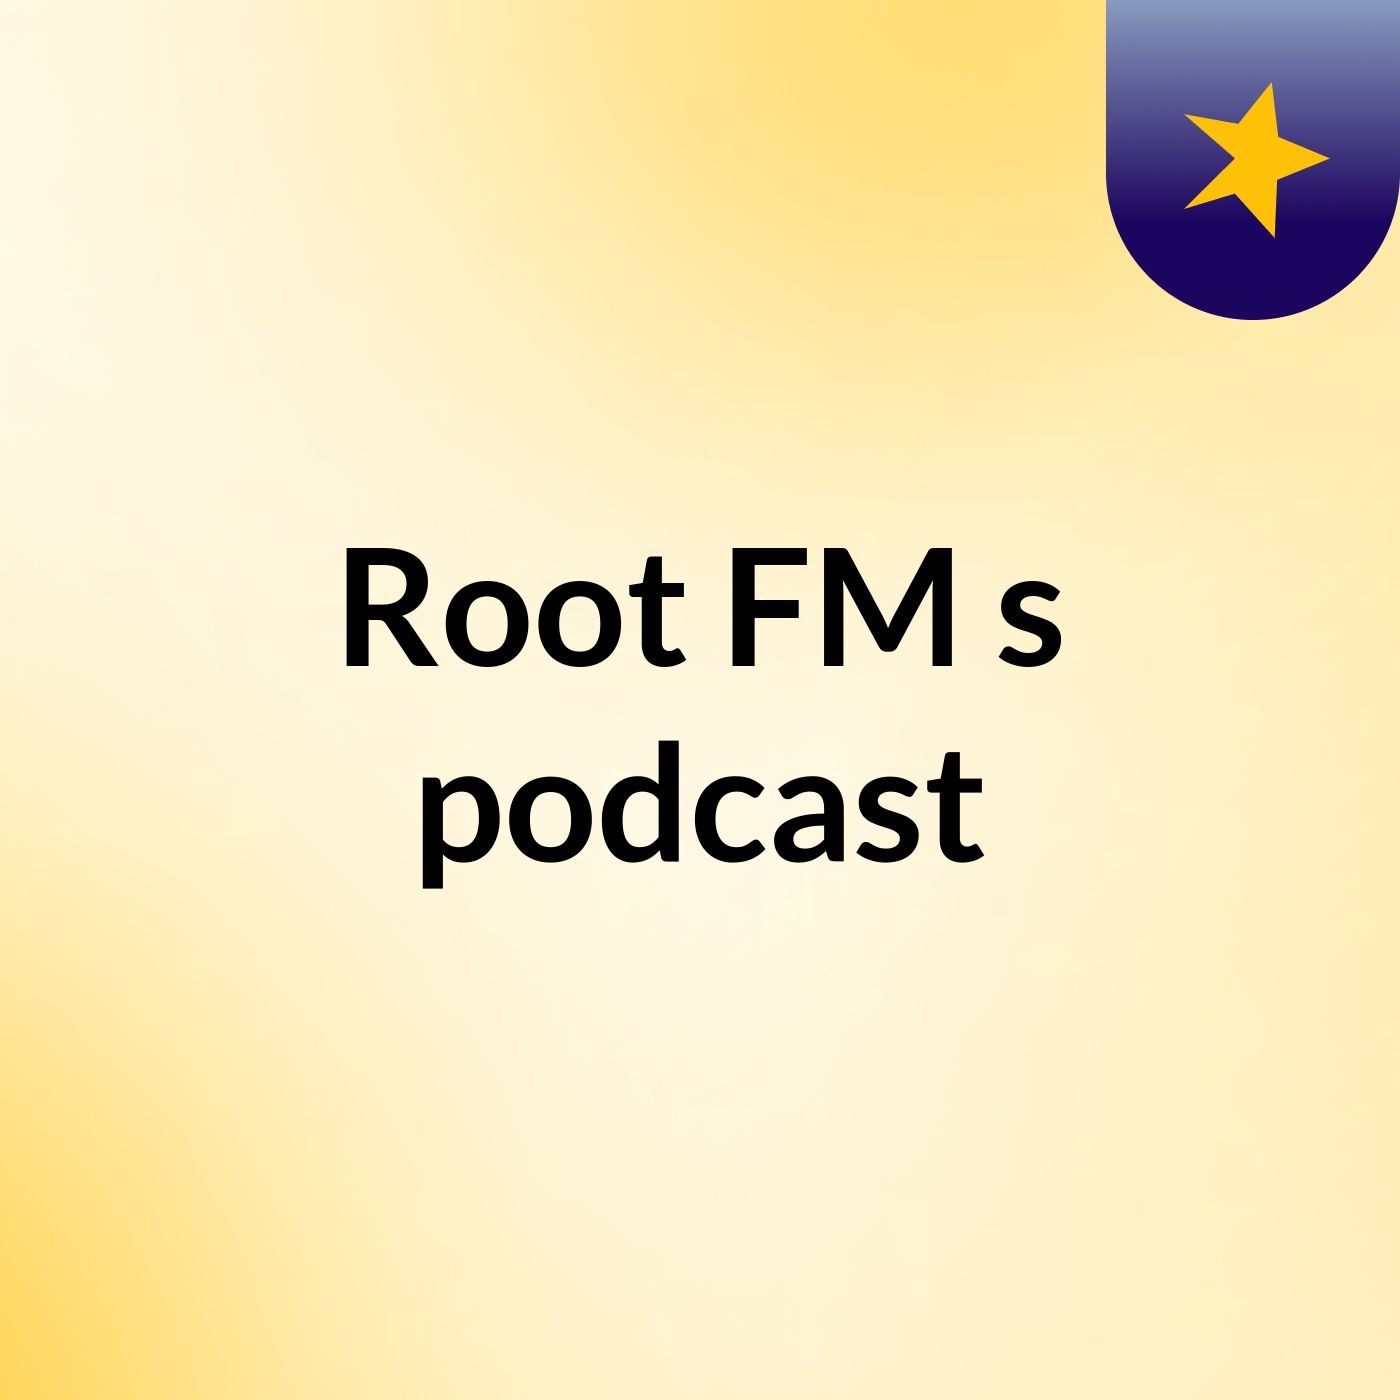 Episode 4 - Root FM's podcast